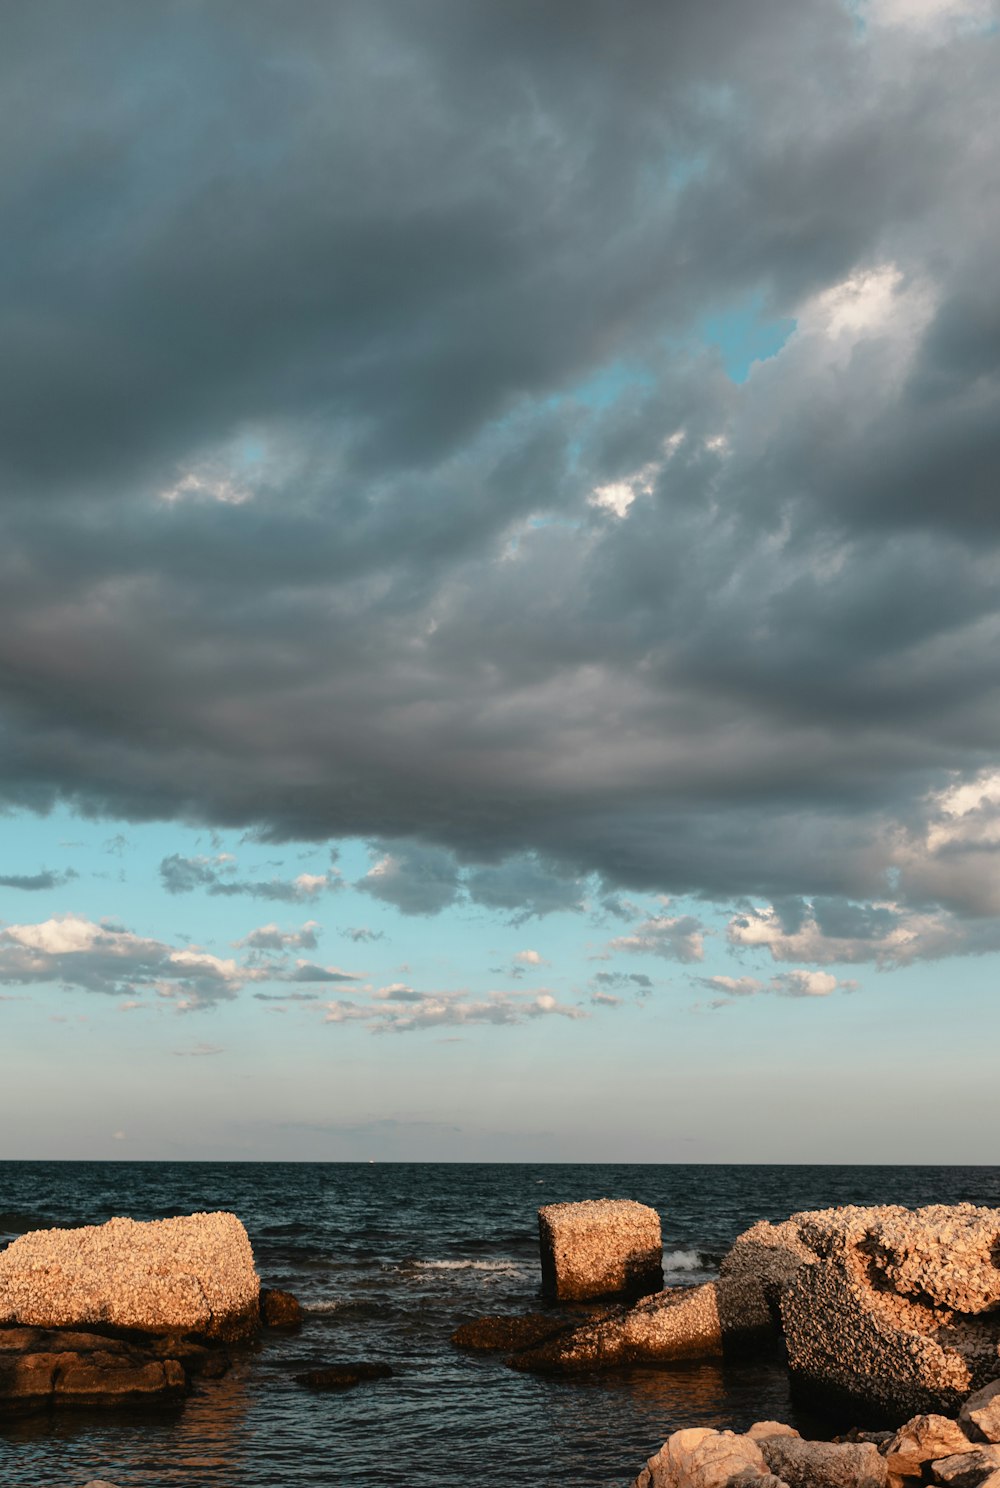 a person standing on rocks near the ocean under a cloudy sky